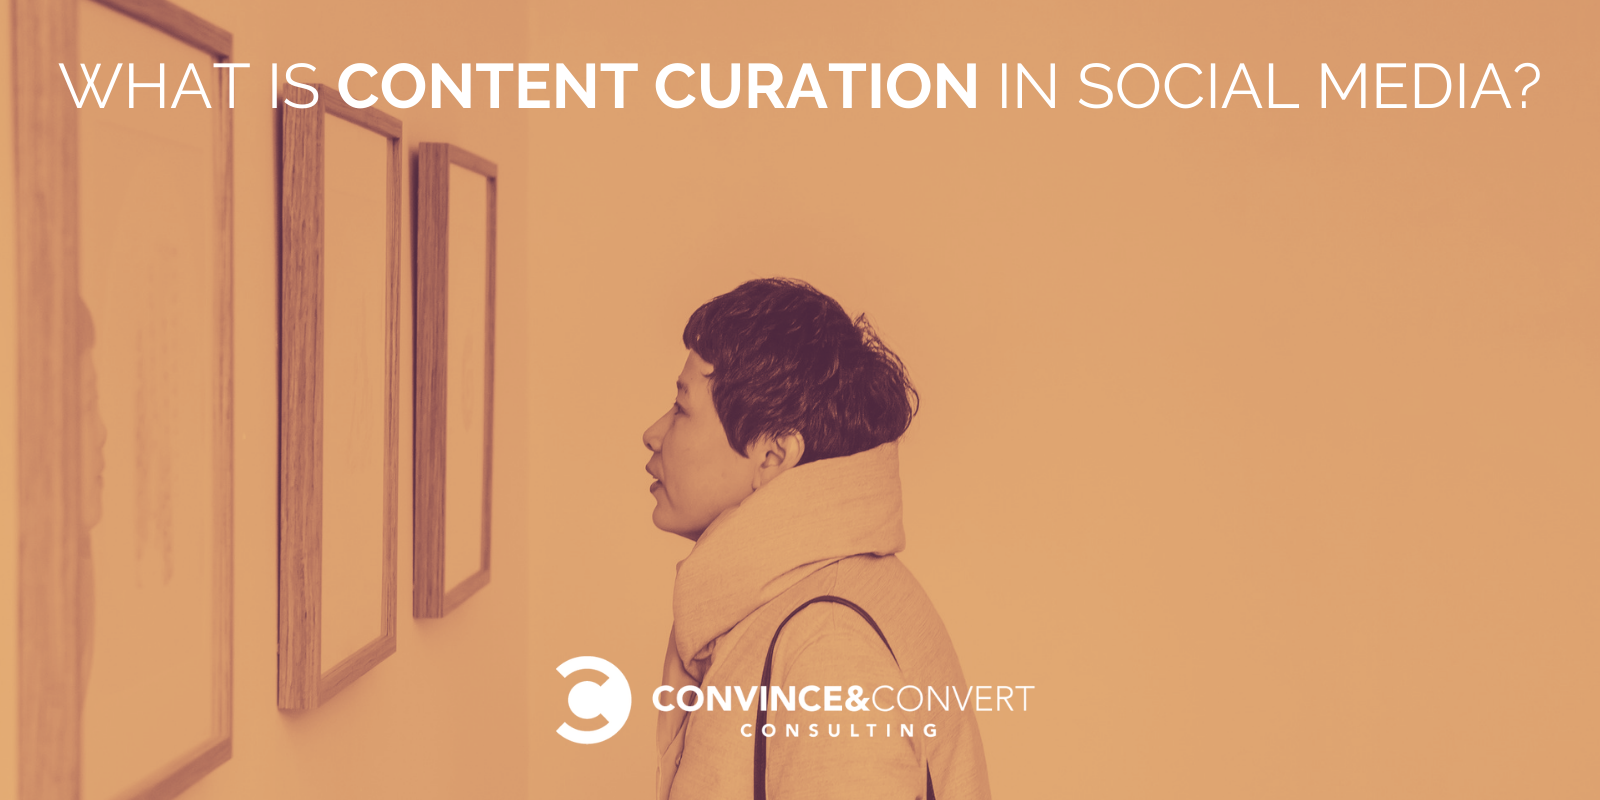 What is content curation in social media?